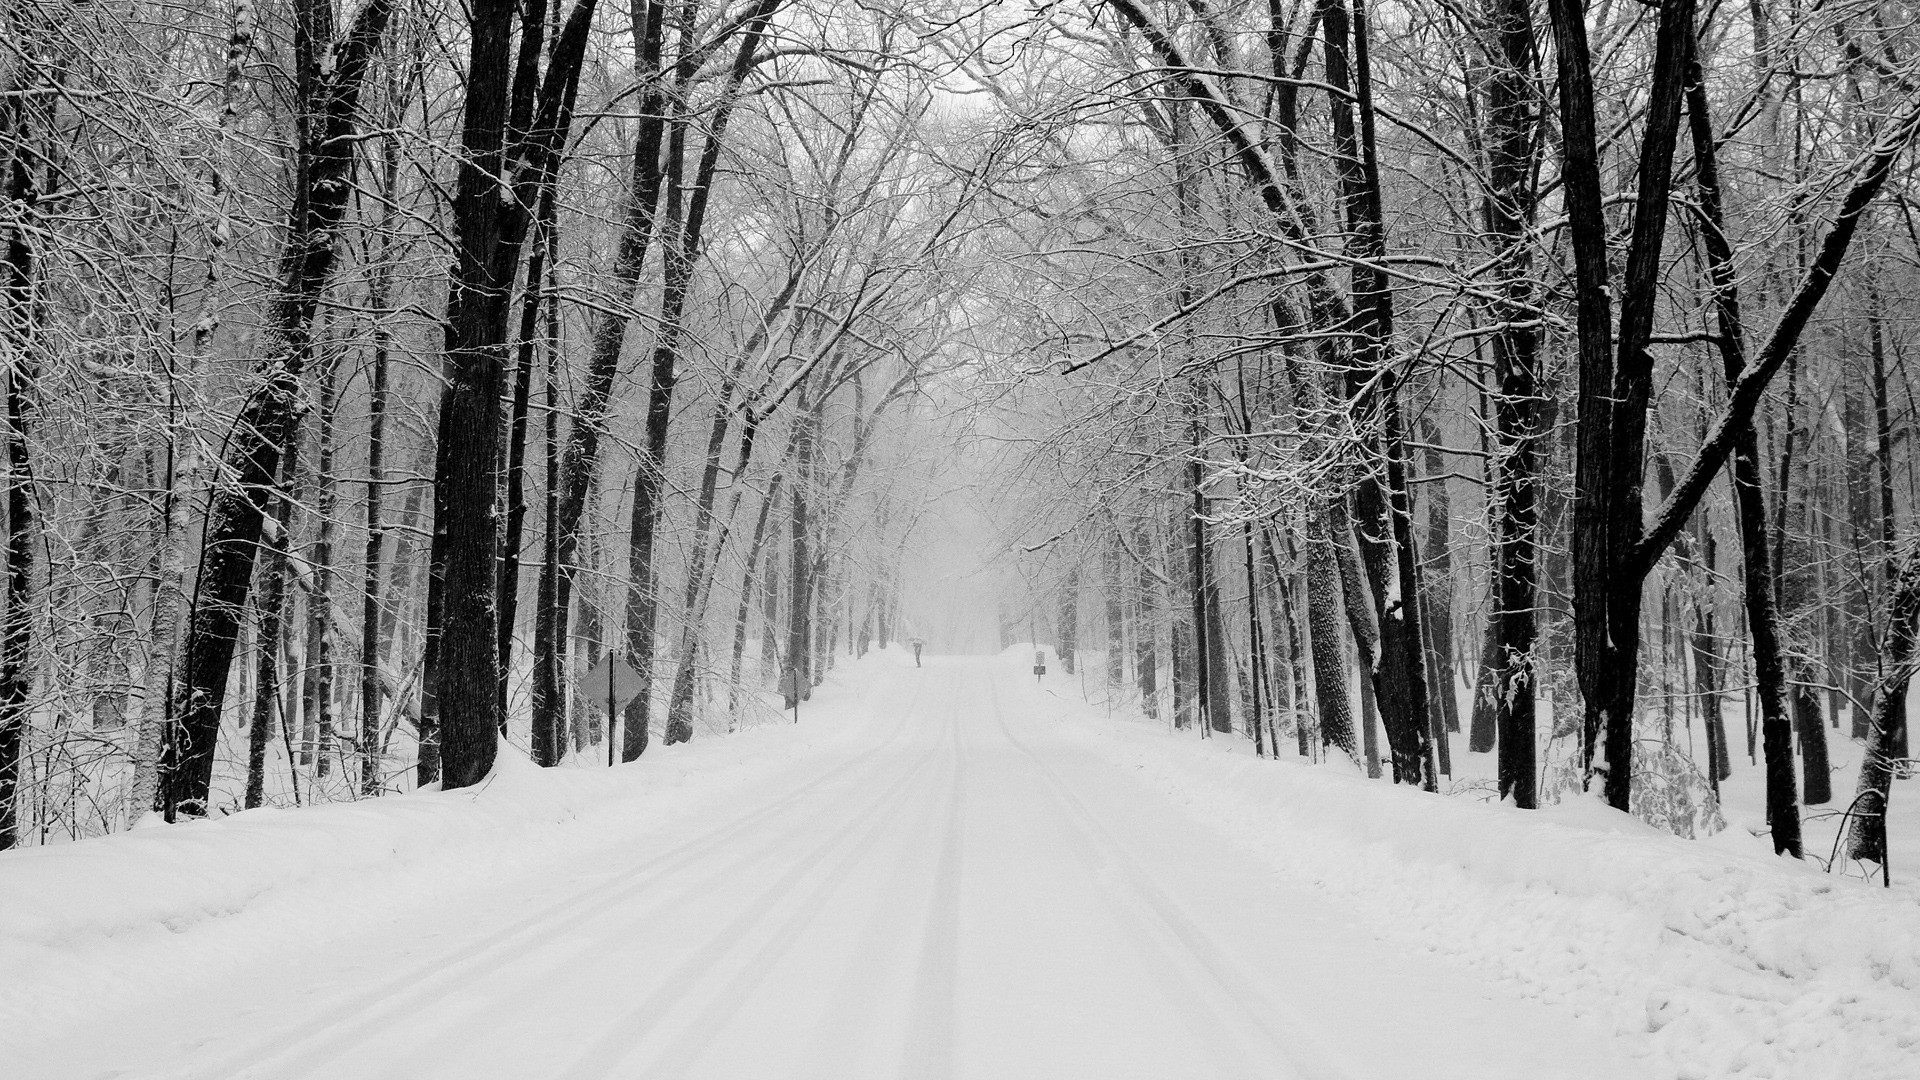 1920x1080 Explore Forest Wallpaper, Nature Wallpaper, and more! Snowy Road